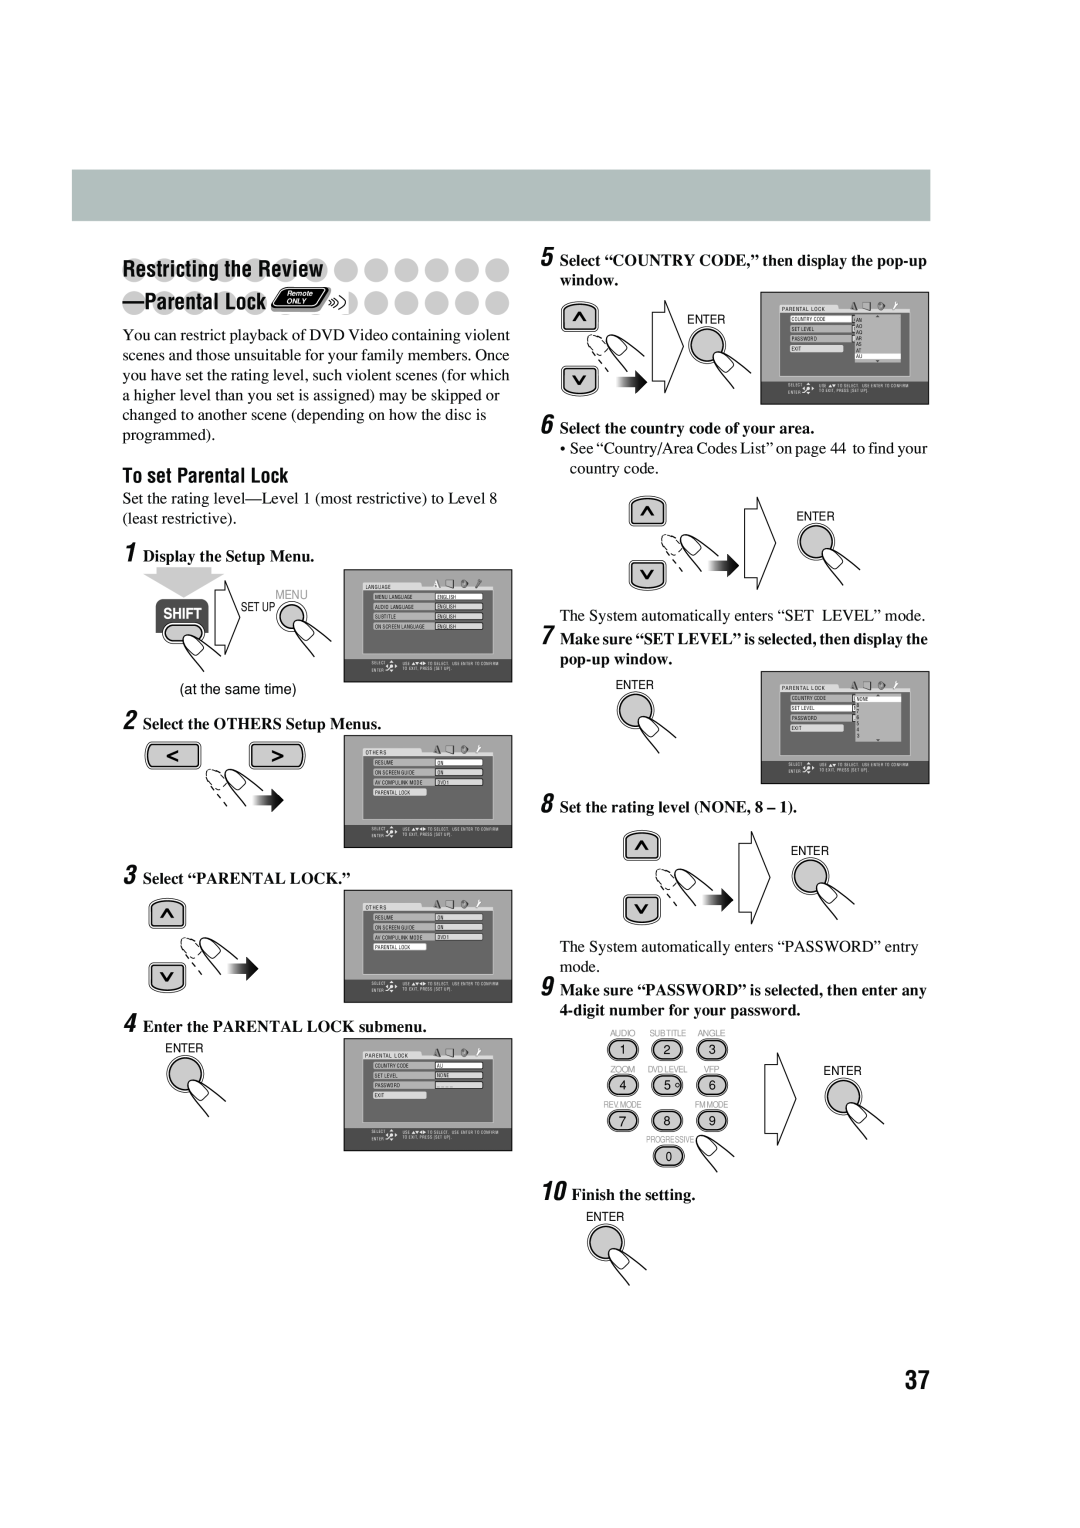 JVC UX-P450 Restricting the Review, ParentalLock ONLY, To set Parental Lock, Display the Setup Menu, Finish the setting 